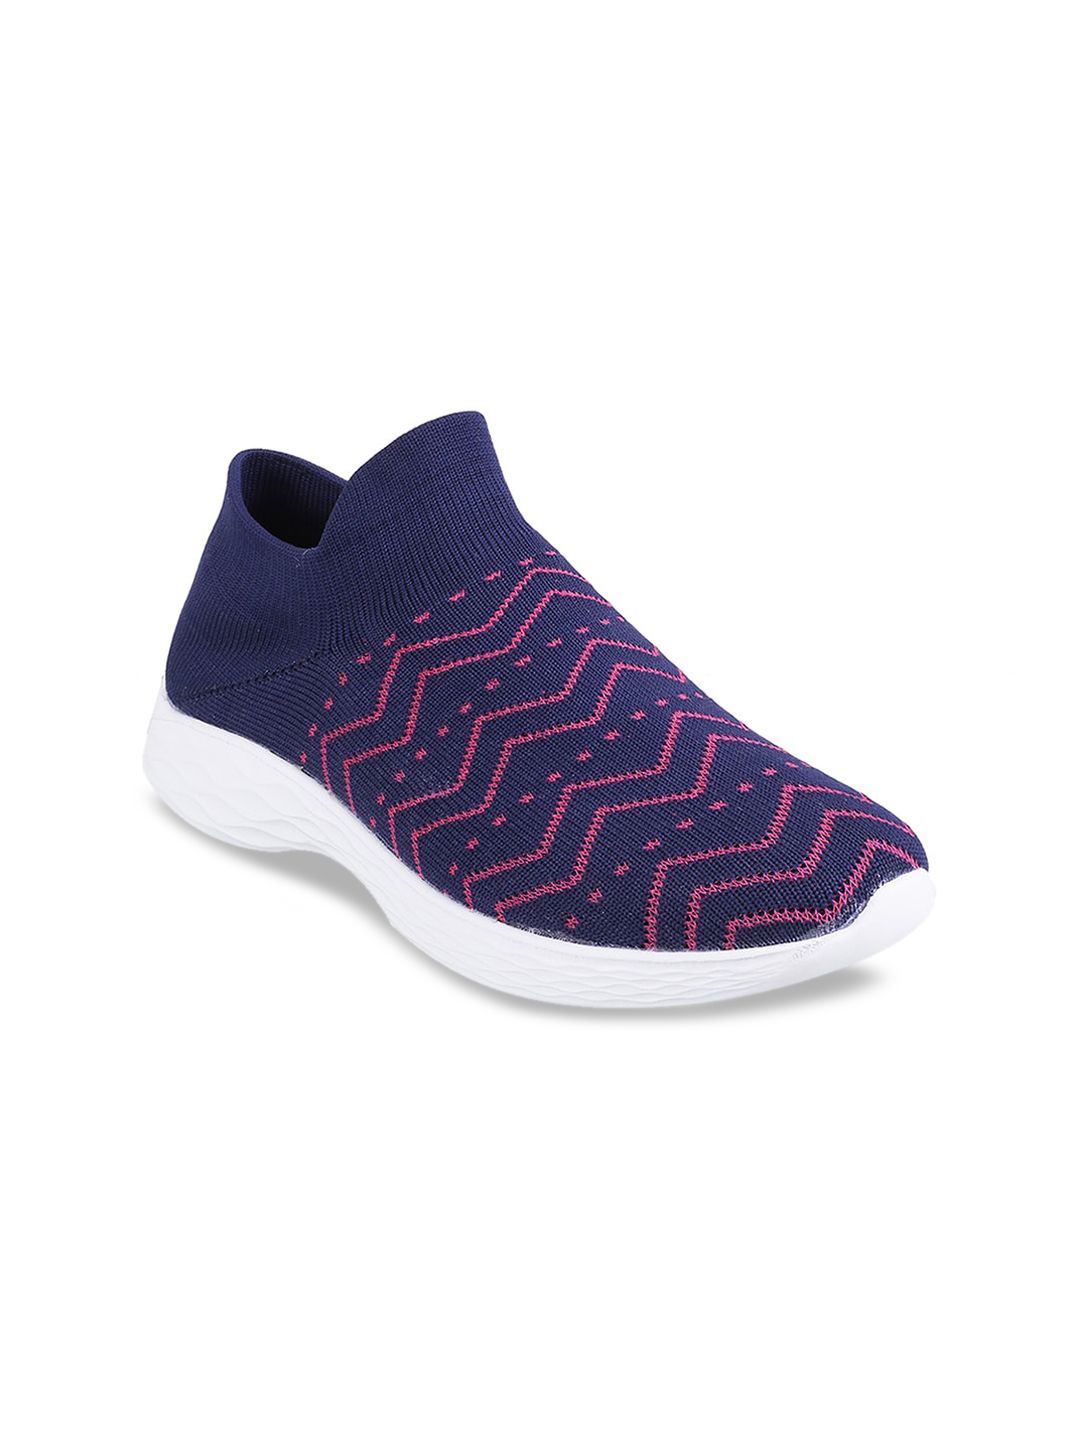 Mochi Women Blue Printed Slip-On Sneakers Price in India